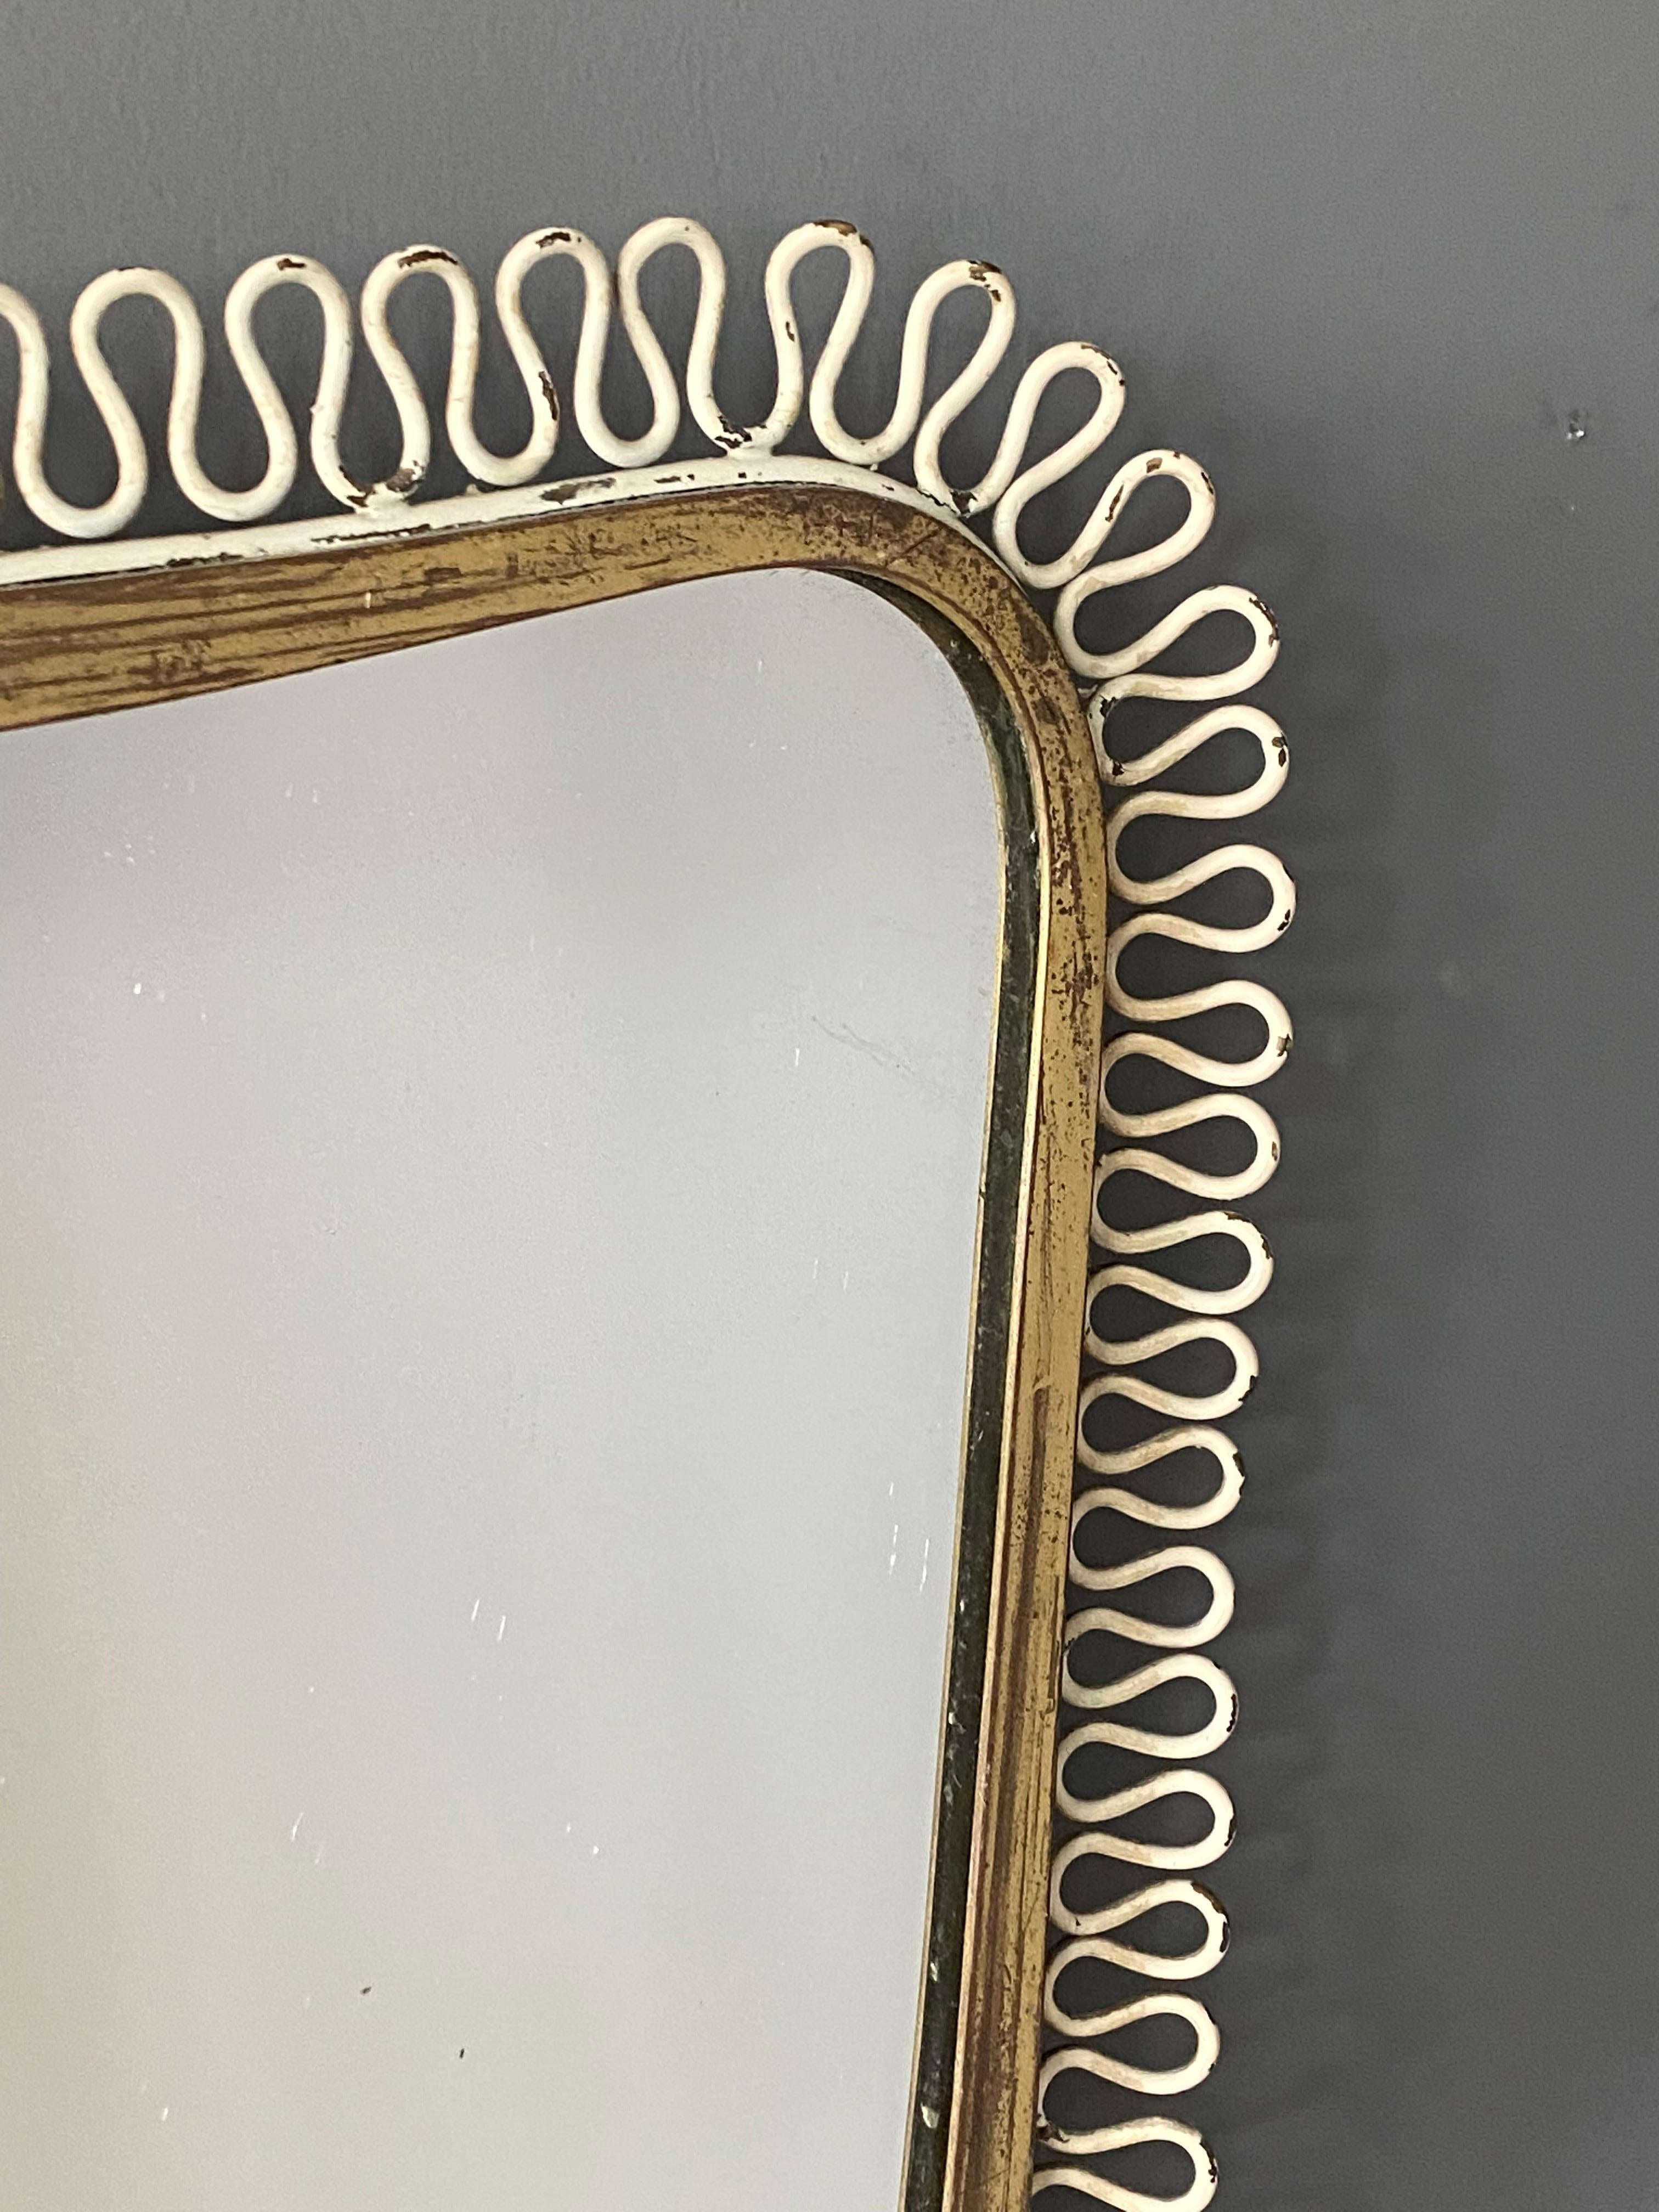 An organic wall mirror, produced in Italy, 1940s. Organically cut mirror glass is framed in brass. Features fine ornamentation in original white paint.

Other designers of the period include Gio Ponti, Fontana Arte, Max Ingrand, Franco Albini, and